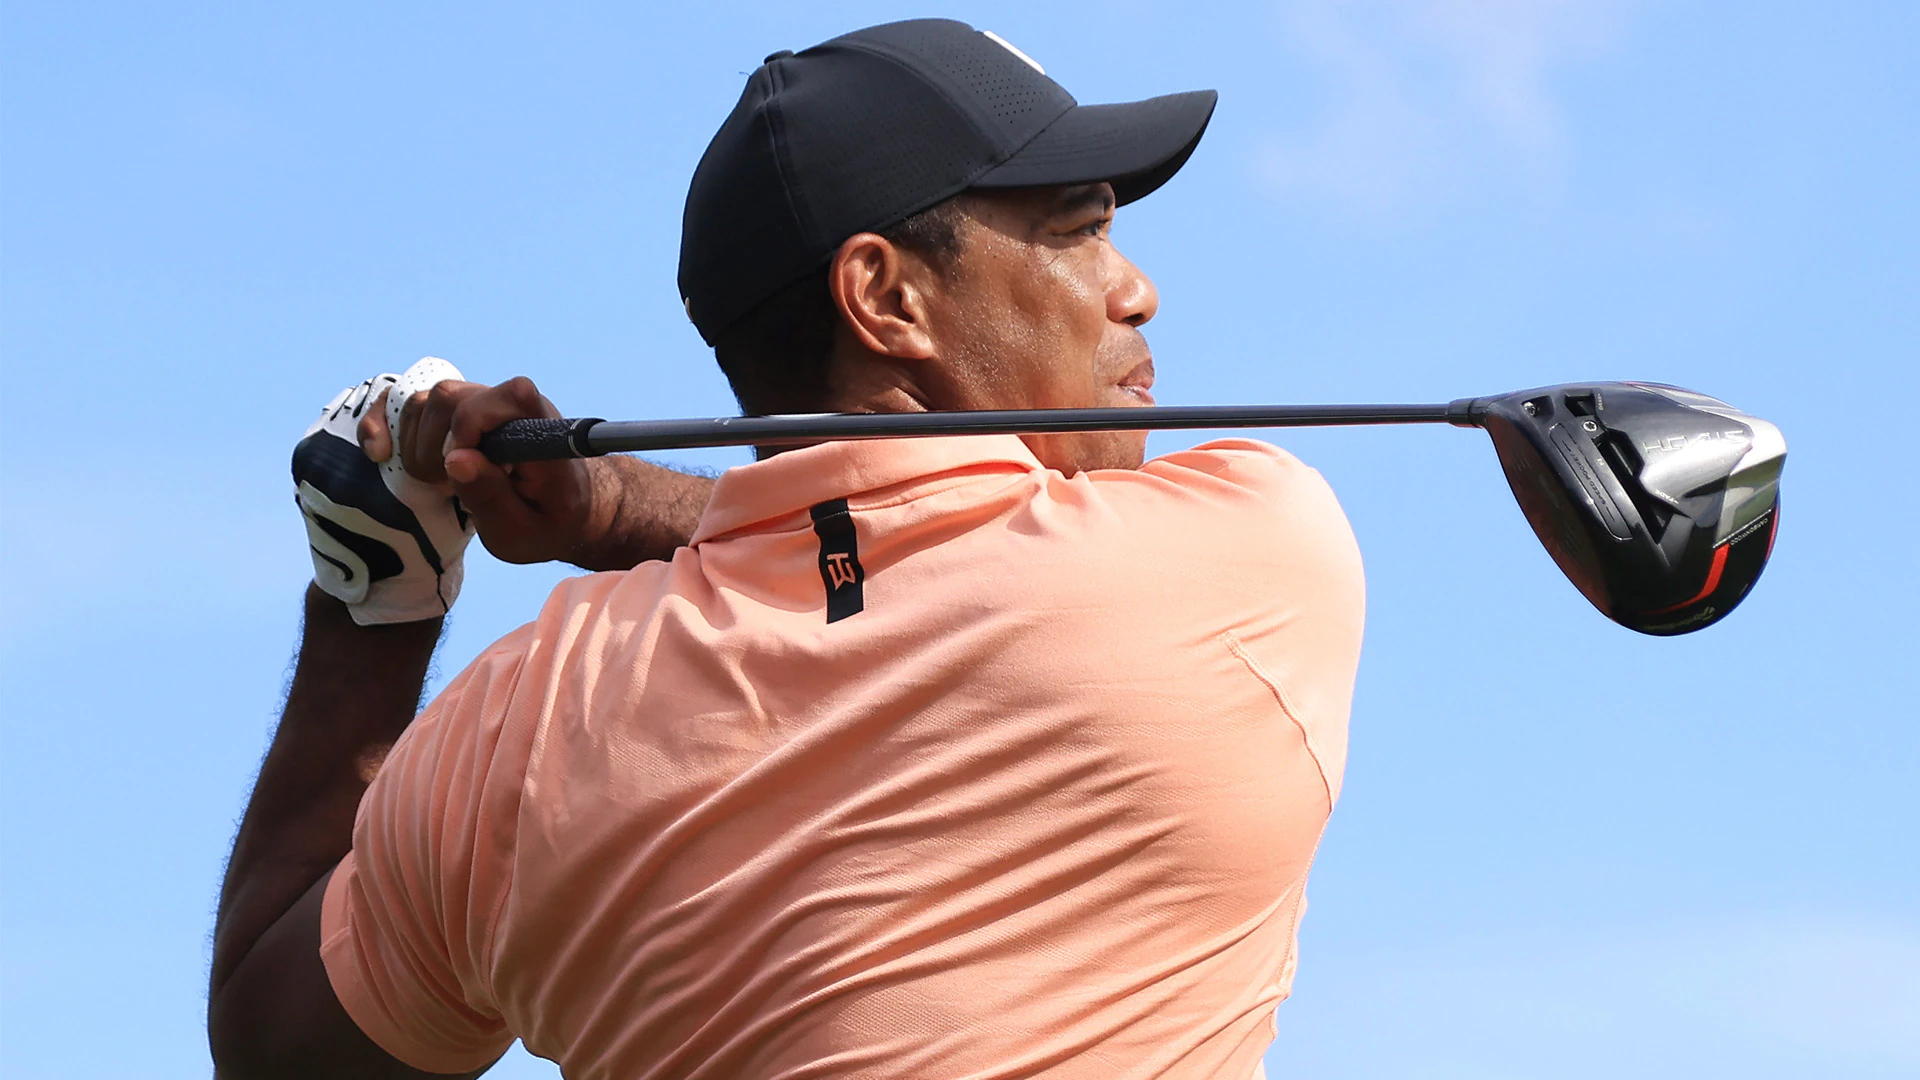 Despite only hitting three ‘golf shots’ in Rd. 1 of PNC, Tiger Woods shows progress